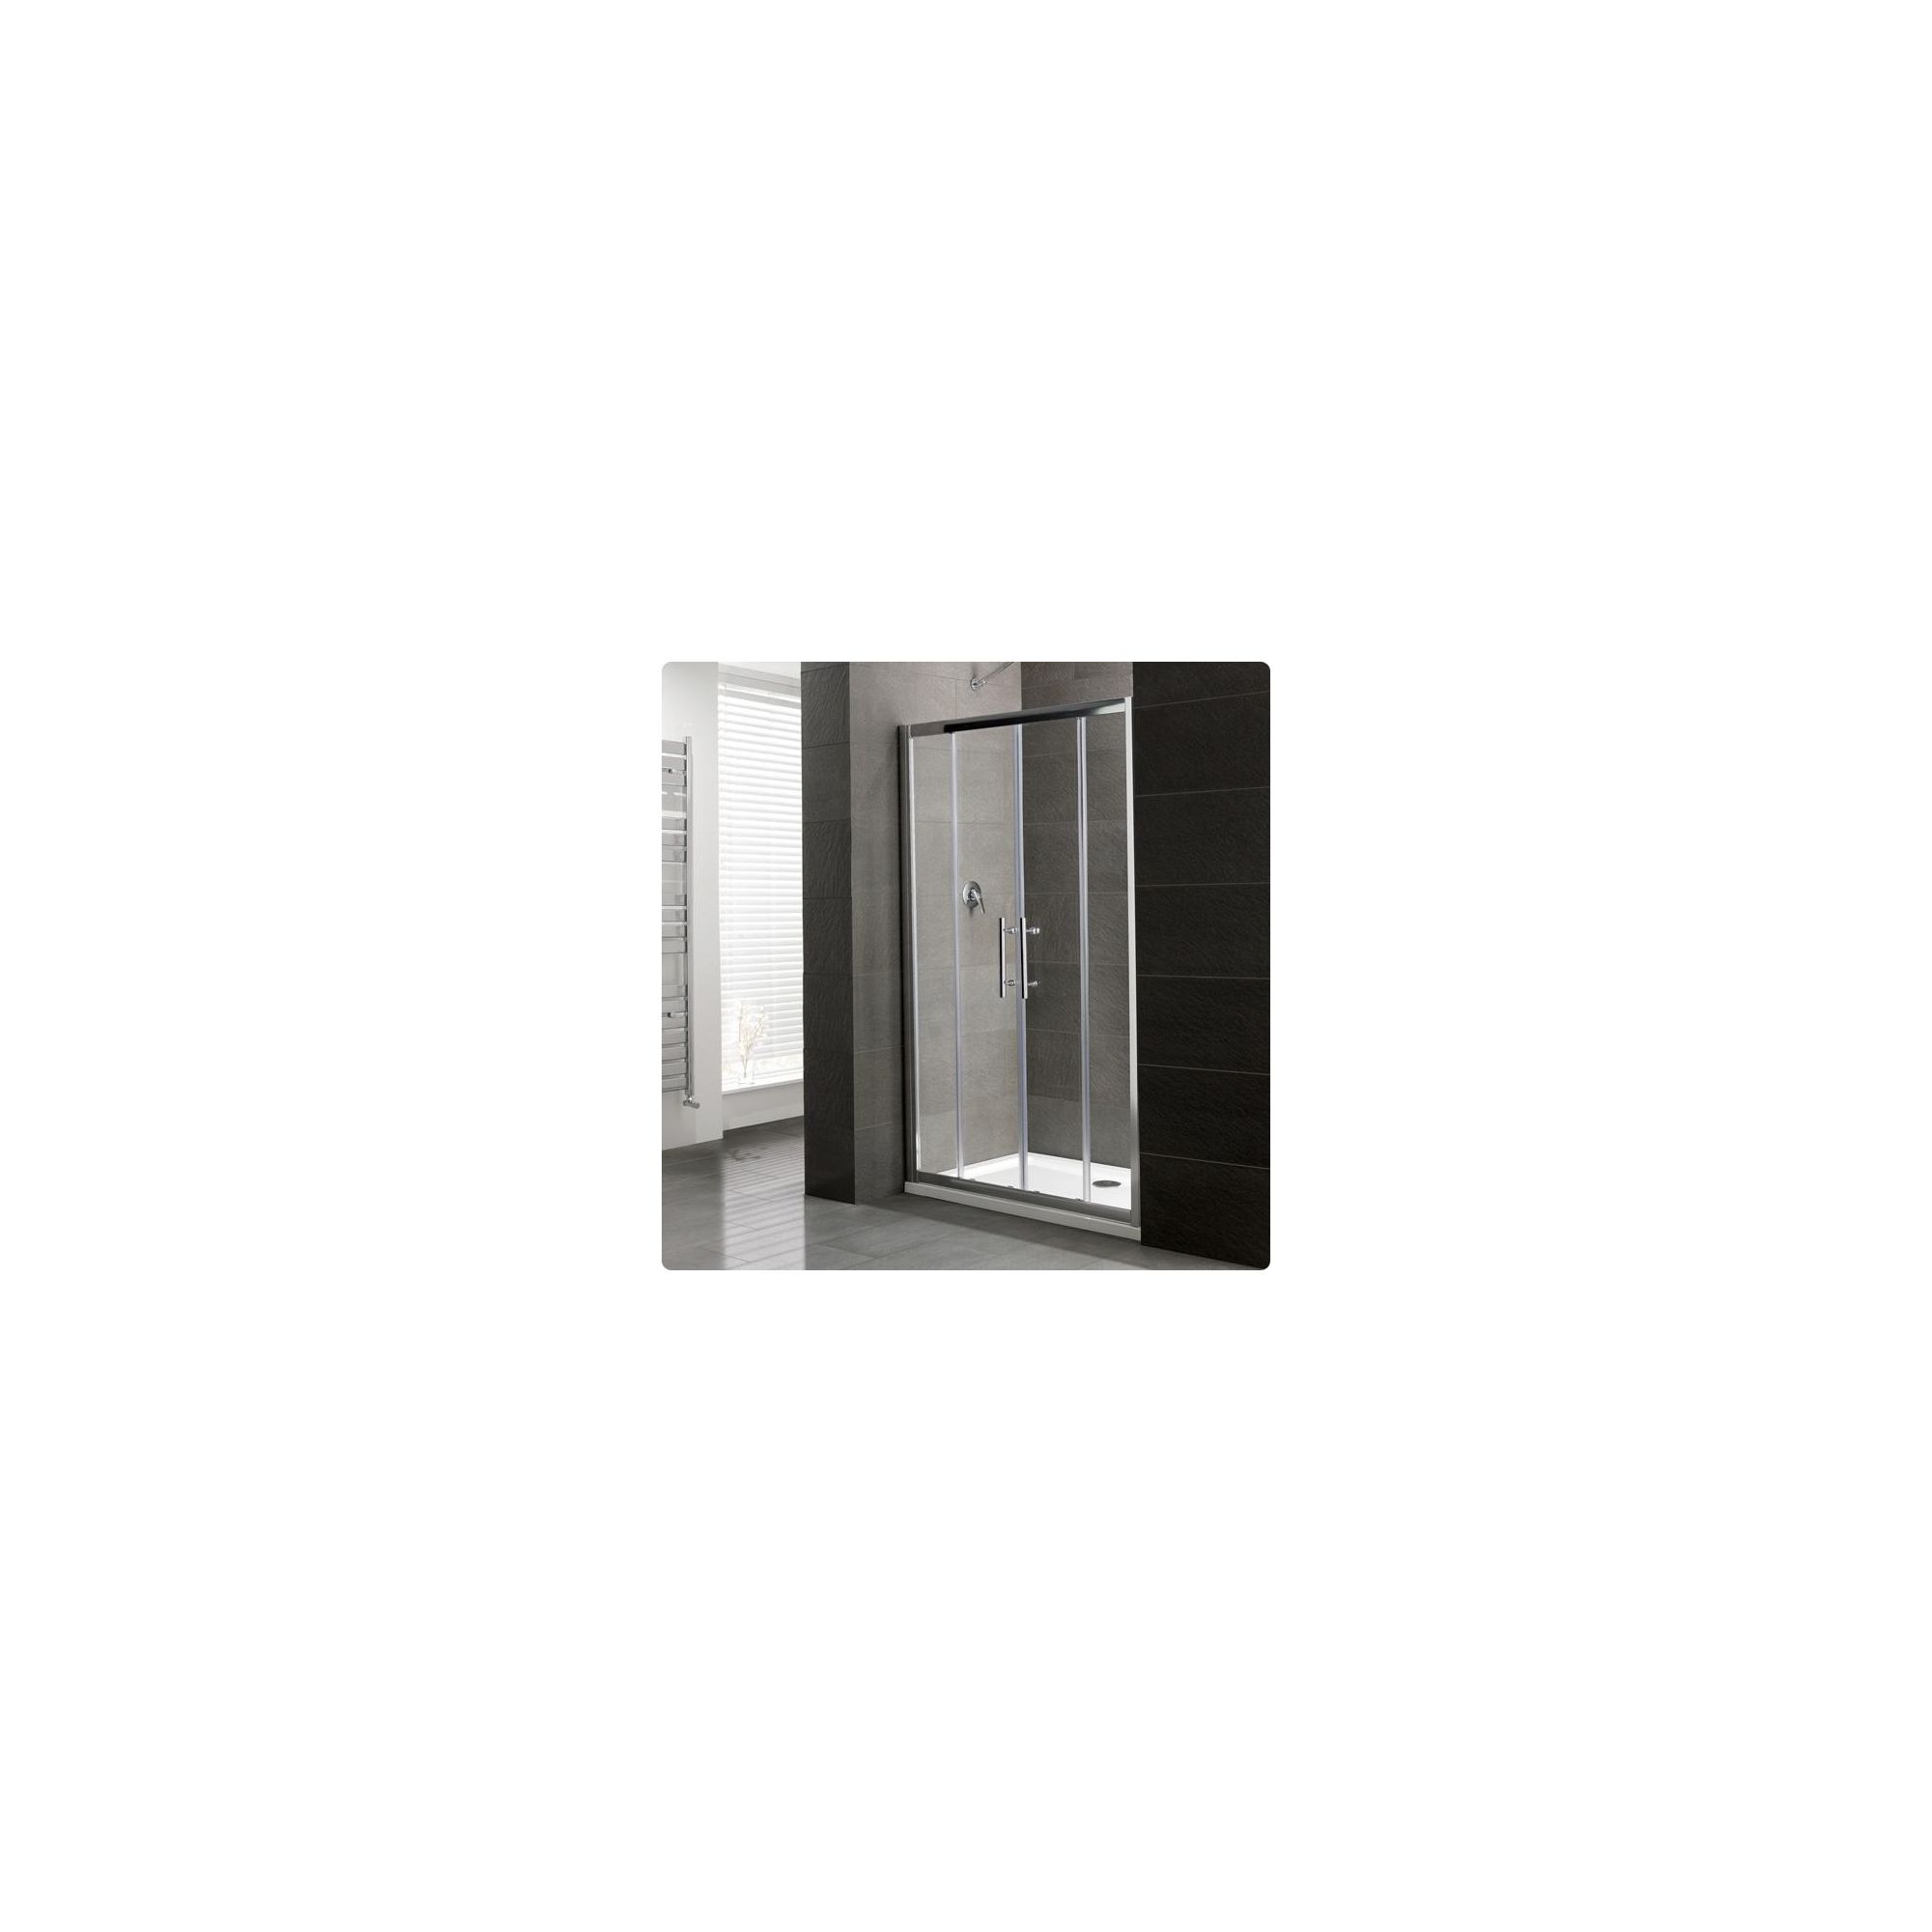 Duchy Select Silver Double Sliding Door Shower Enclosure, 1400mm x 760mm, Standard Tray, 6mm Glass at Tesco Direct